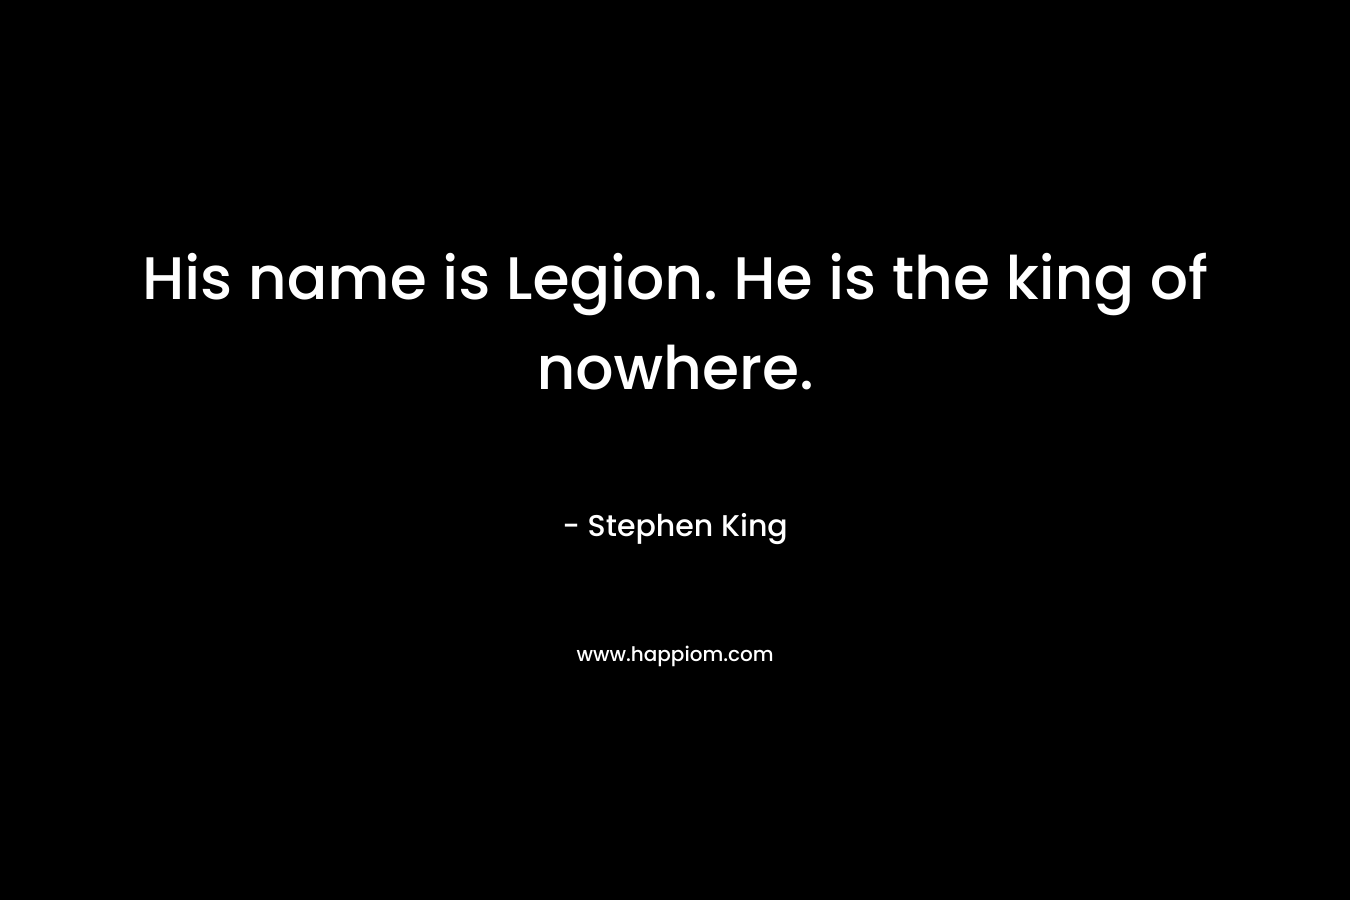 His name is Legion. He is the king of nowhere. – Stephen King